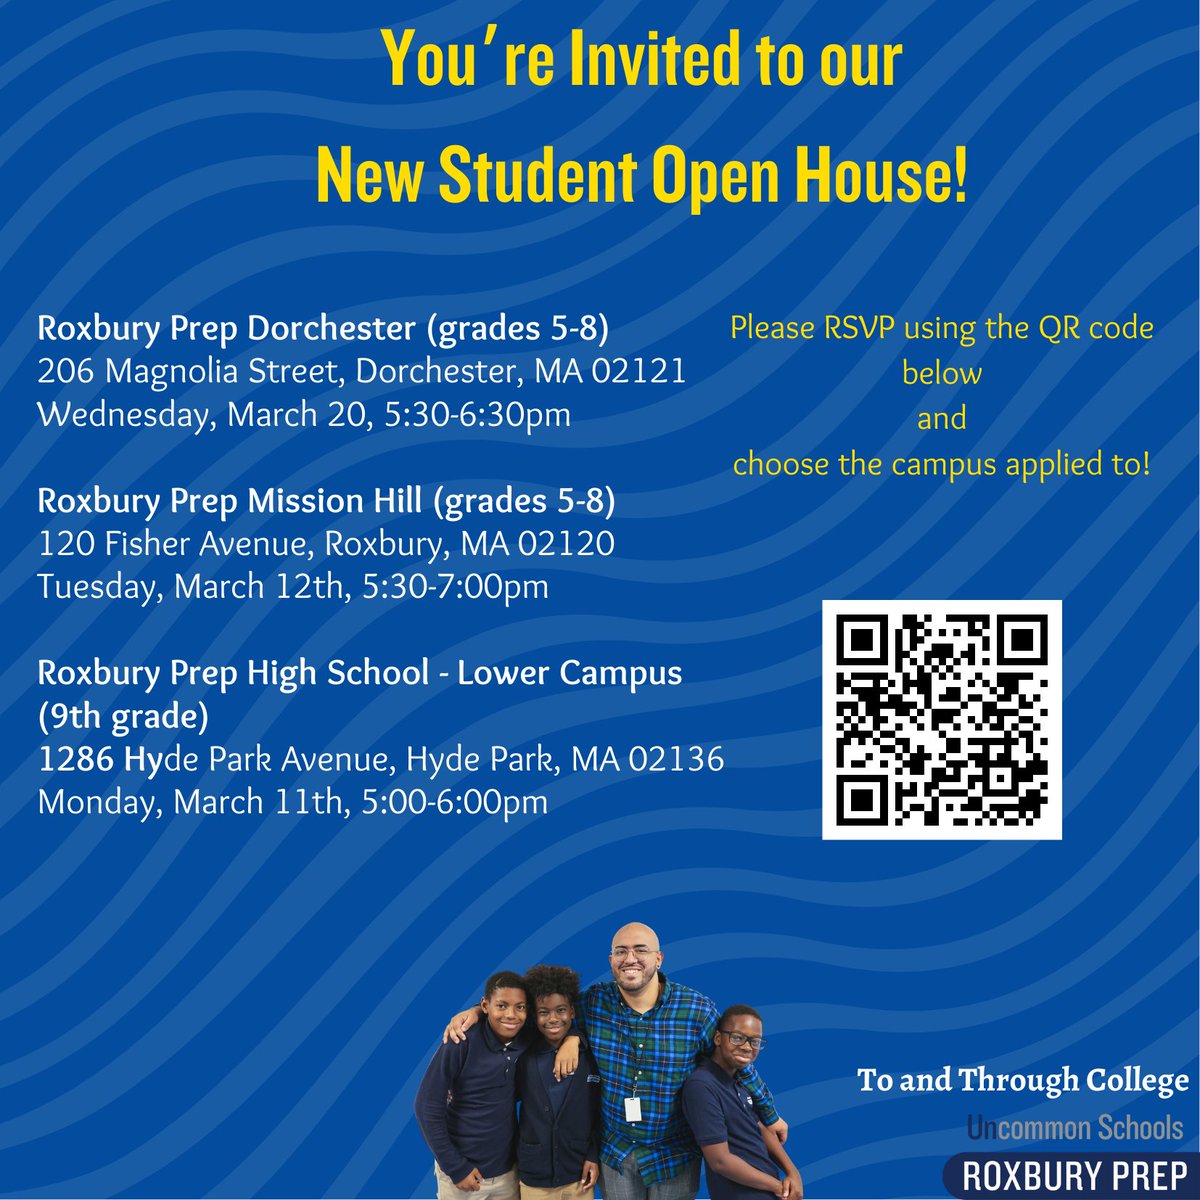 ✏️ Ready to enroll your child at Roxbury Prep? Join us for New Student Open Houses starting March 11th. RSVP using the following link: bit.ly/3SMThty